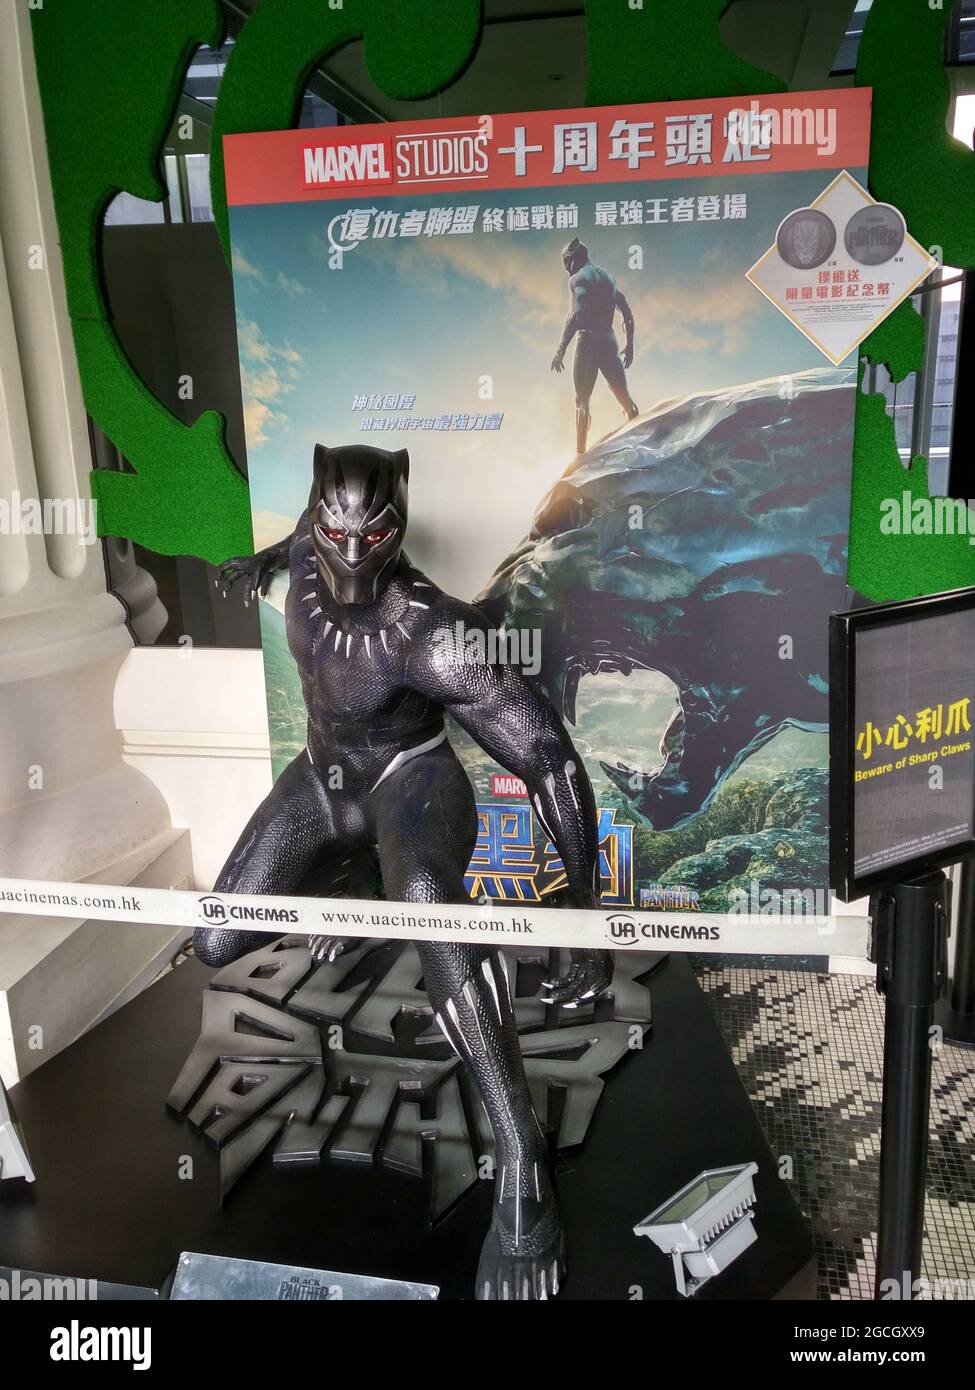 Black Panther display with a statue of the Marvel super hero of Chadwick Boseman at a shopping mall in Hong Kong. Stock Photo